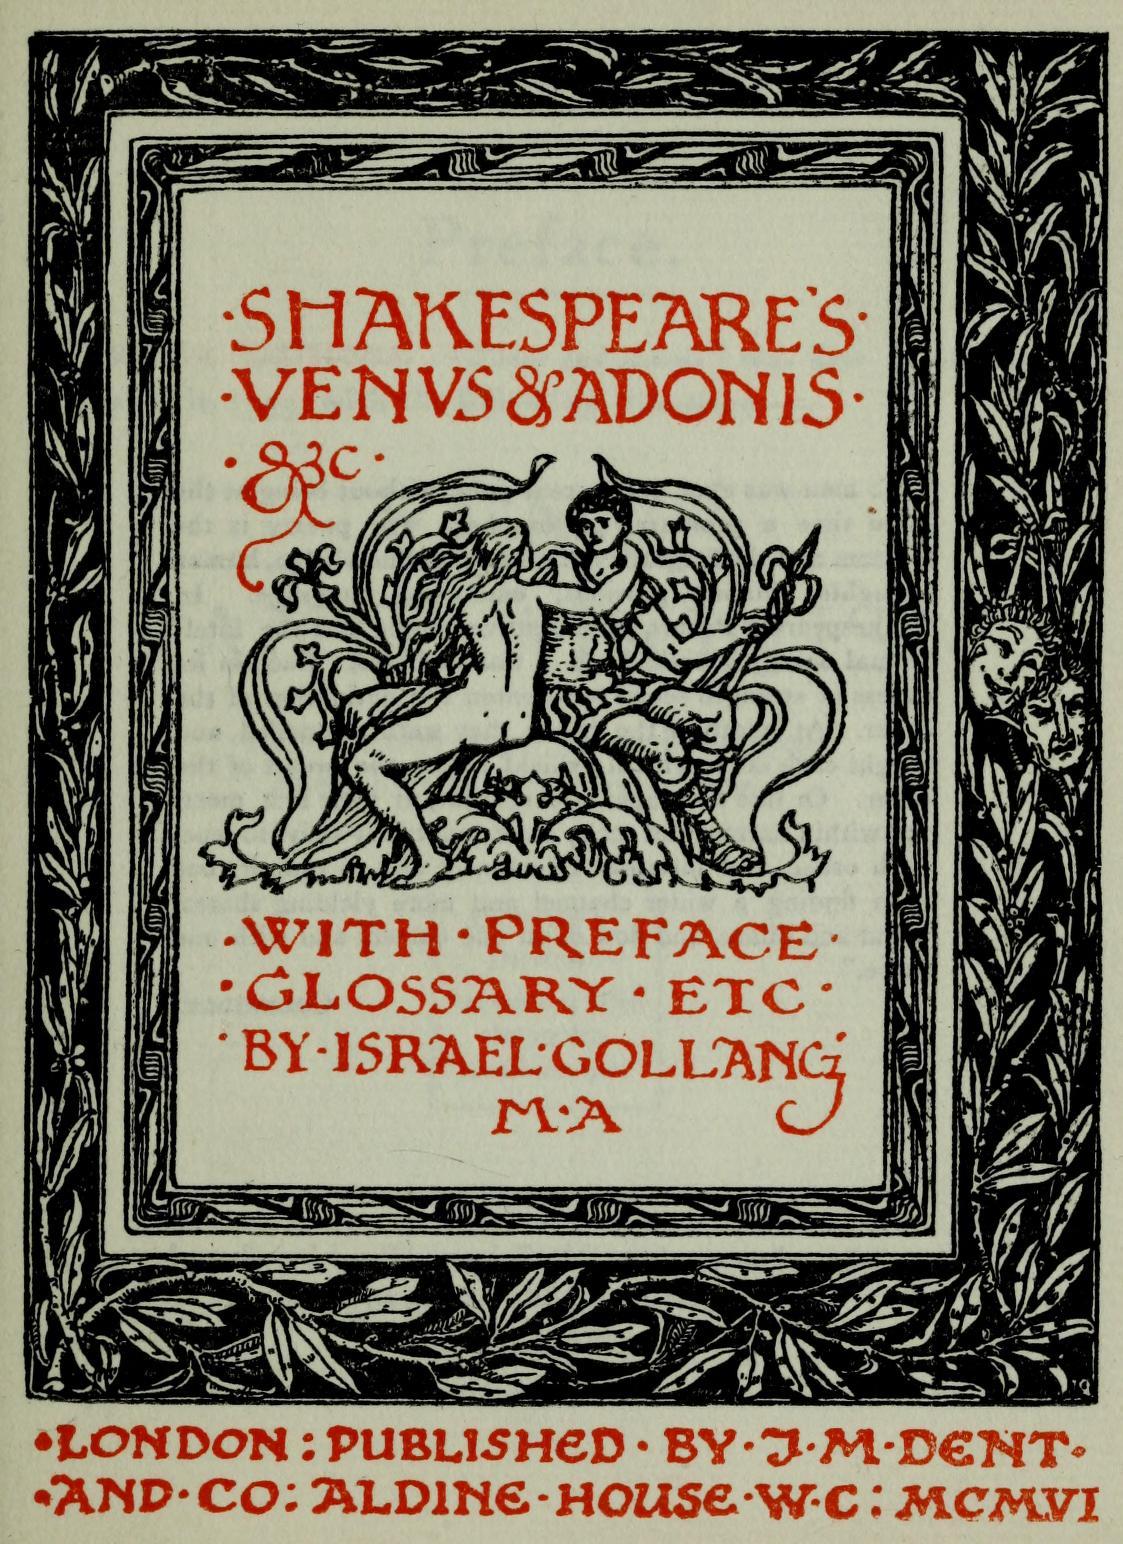 cair–paravel: Frontispieces for J. M. Dent’s Temple Shakespeare series (1899):